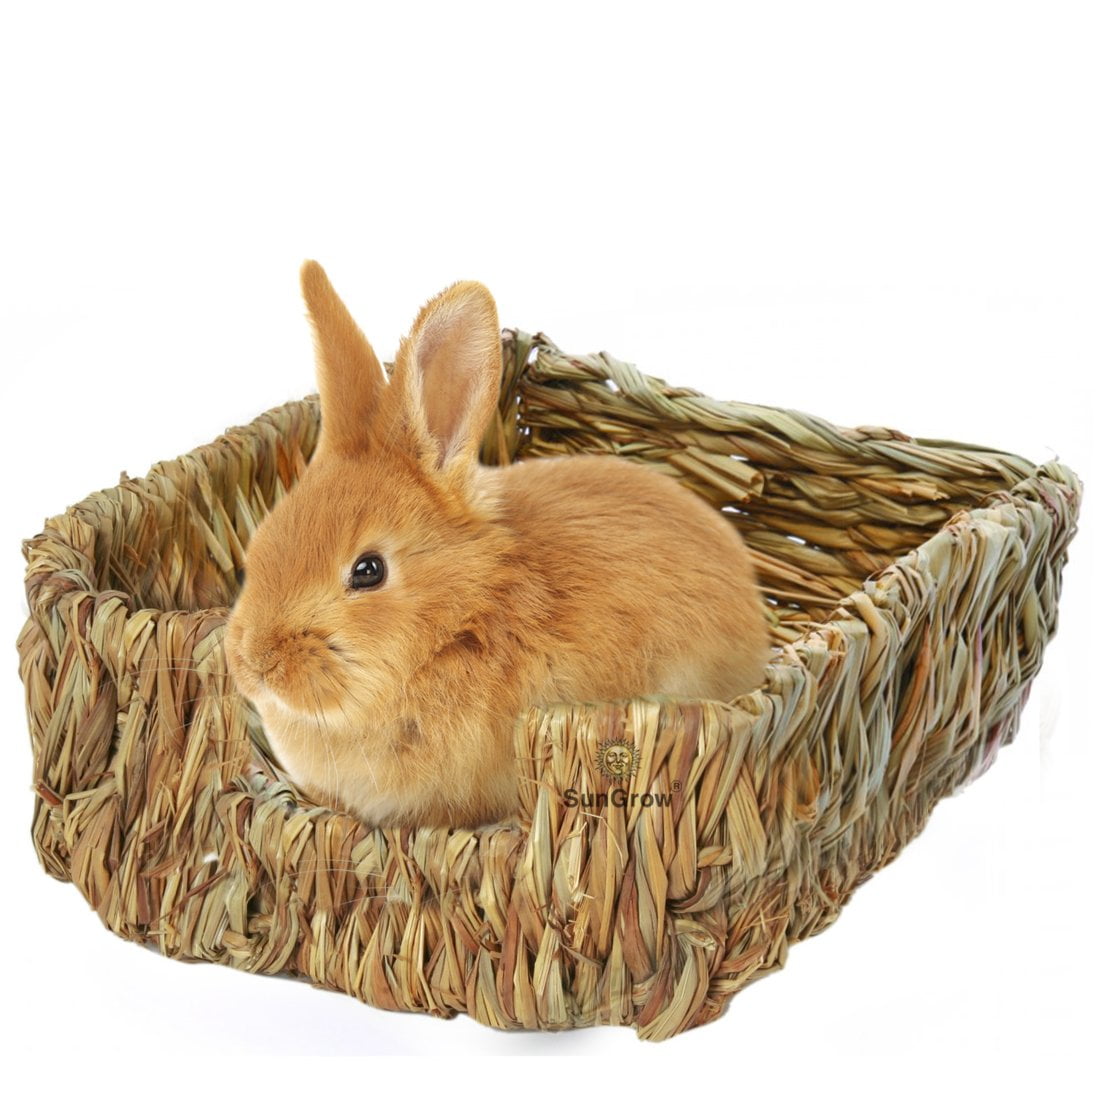 Bunny Relaxation Scale  Pet bunny rabbits, Rabbit cages, Rabbit